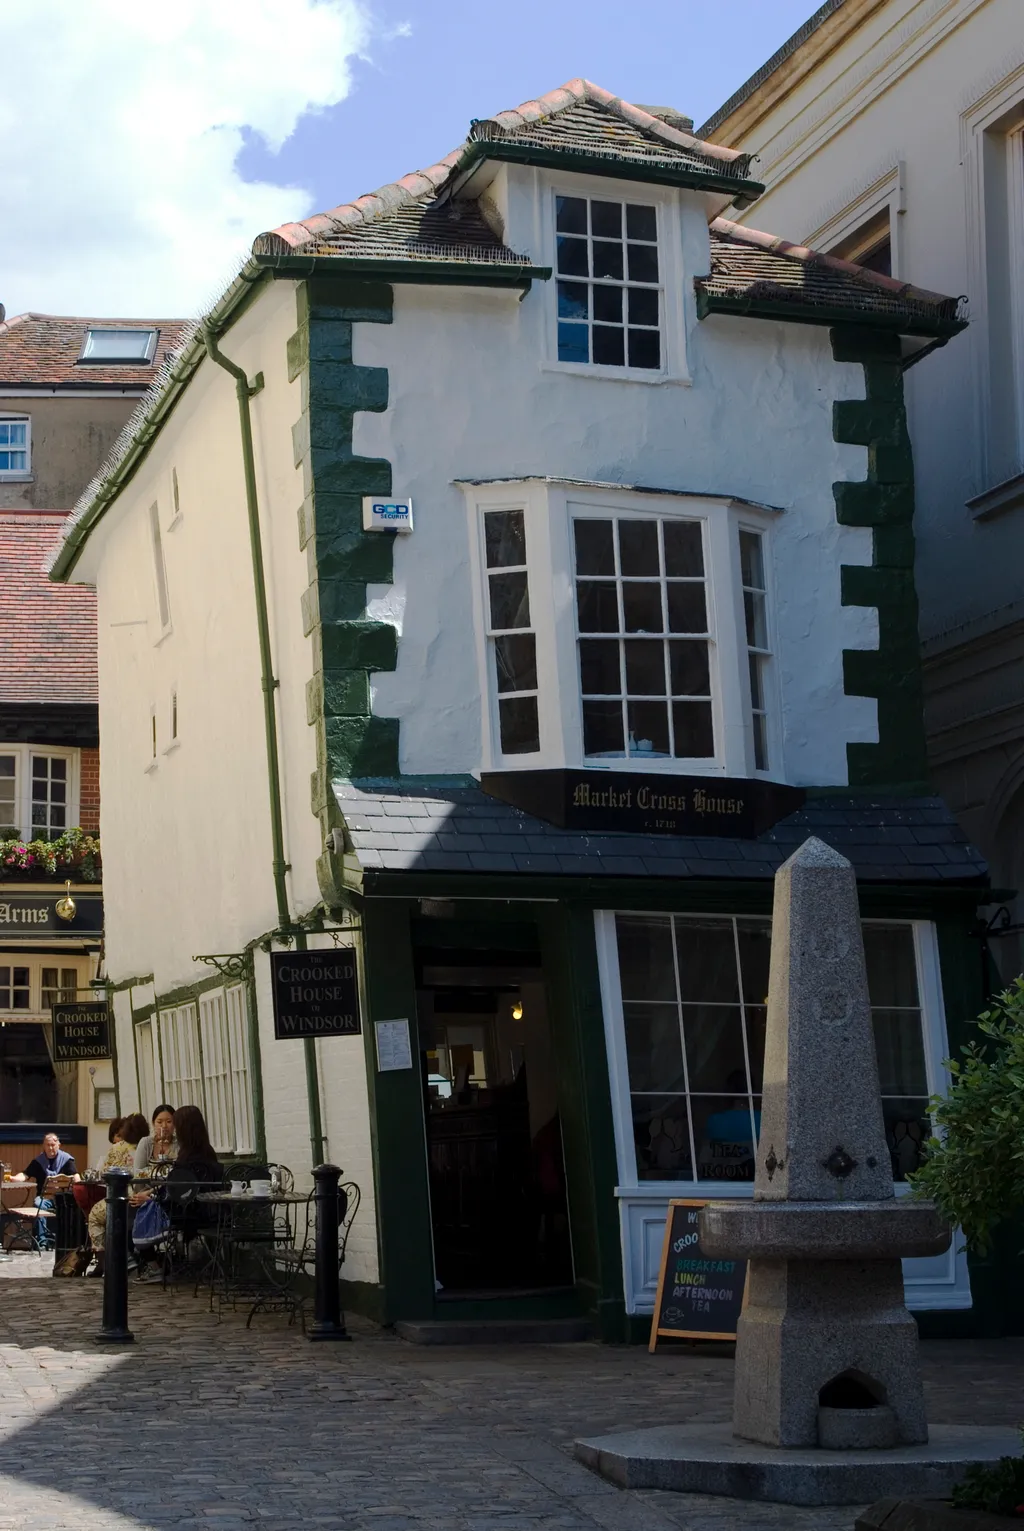 Market Cross House Crooked House in Windsor 